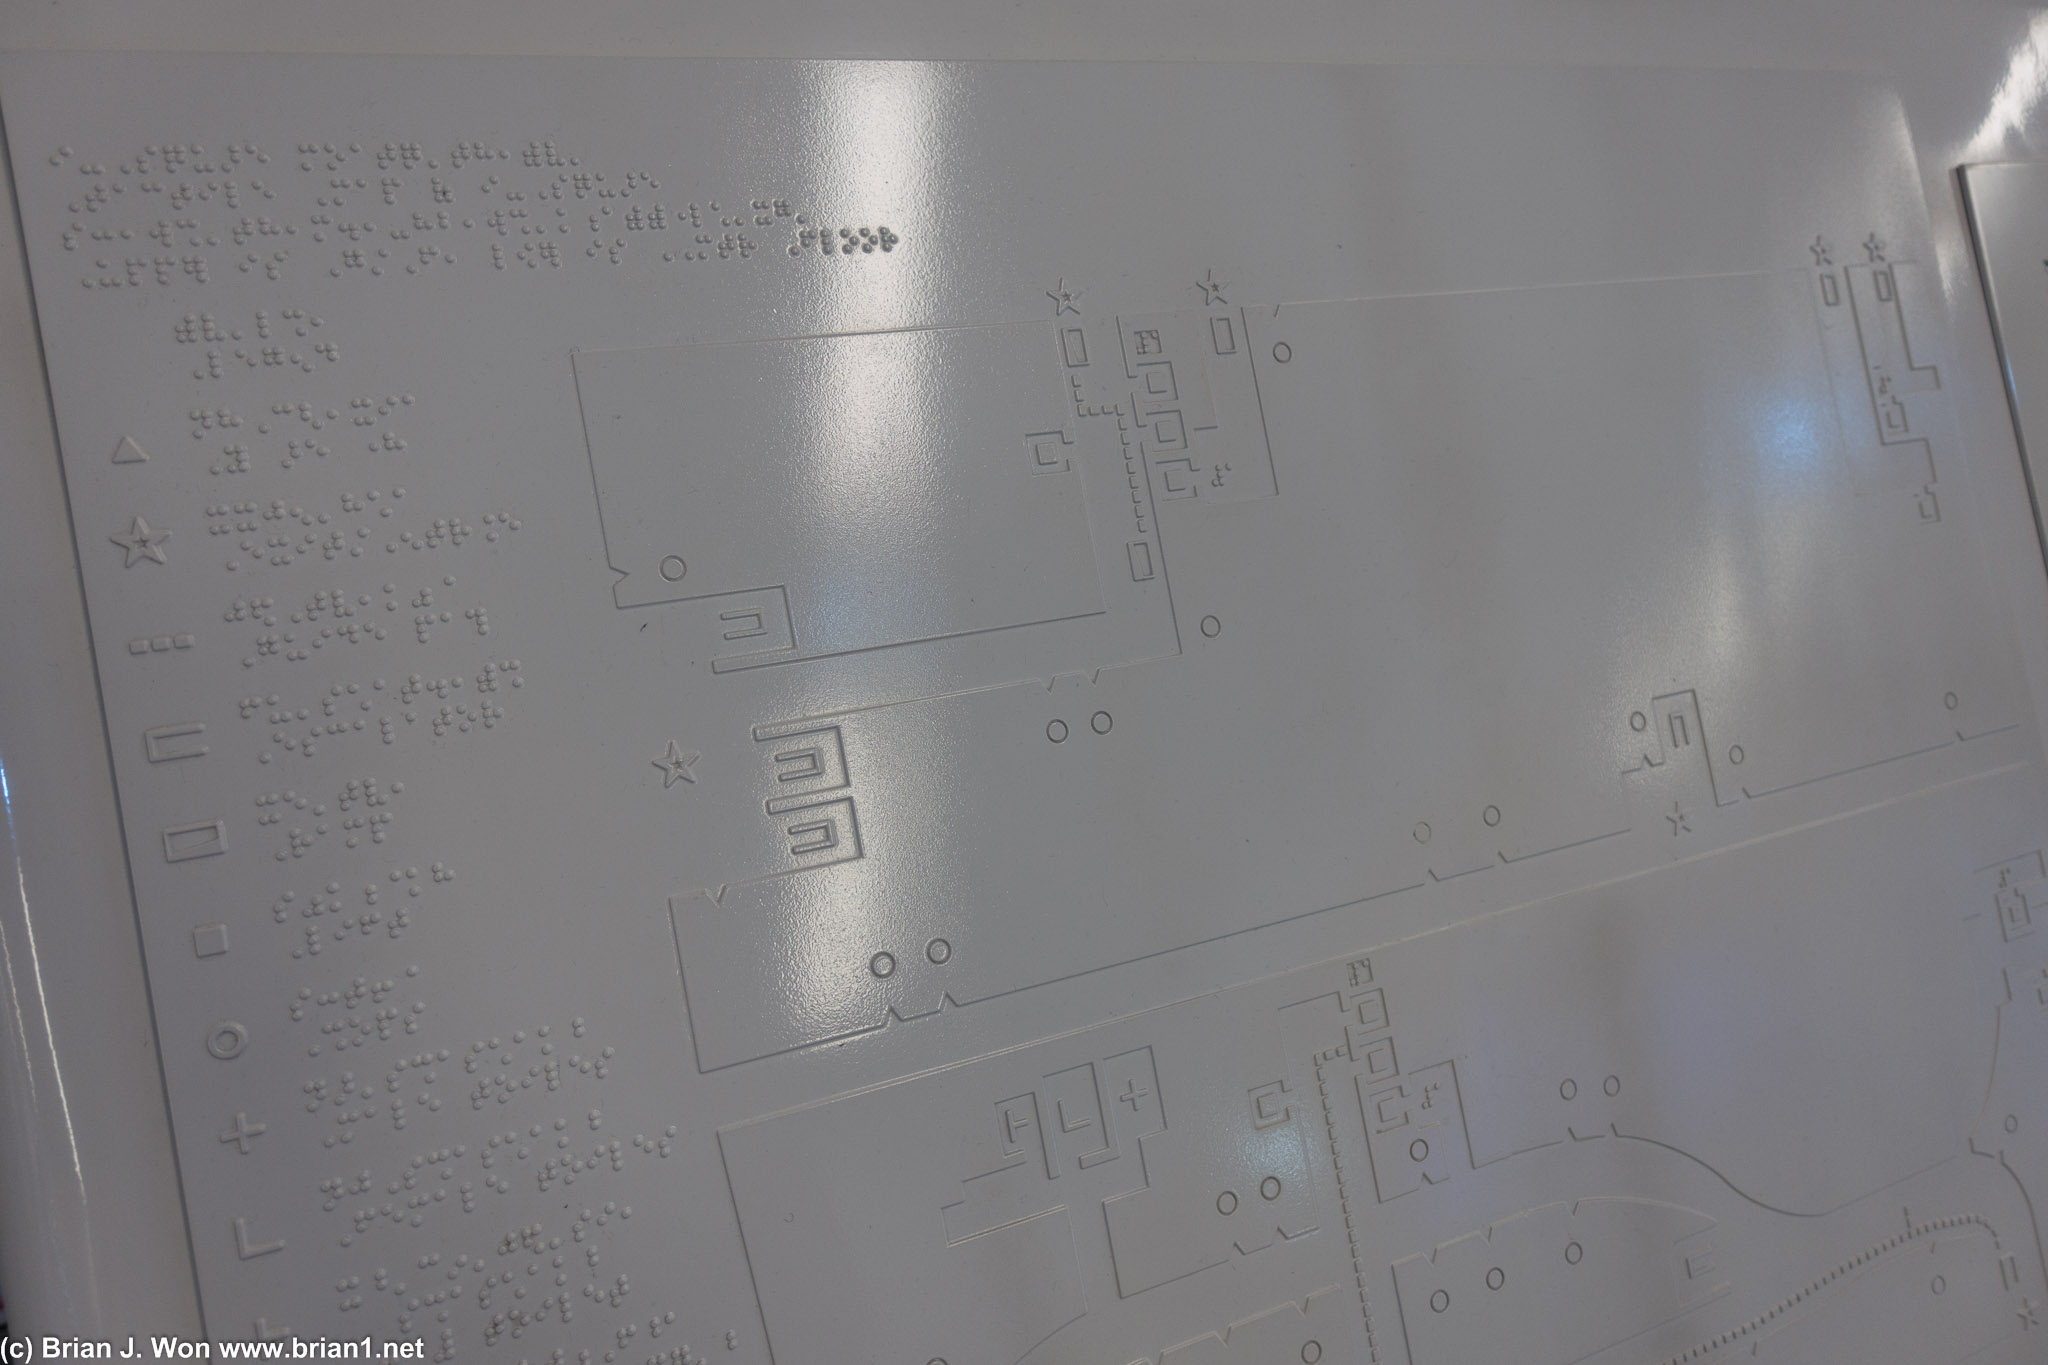 Mall with a map in Braille. Cool.